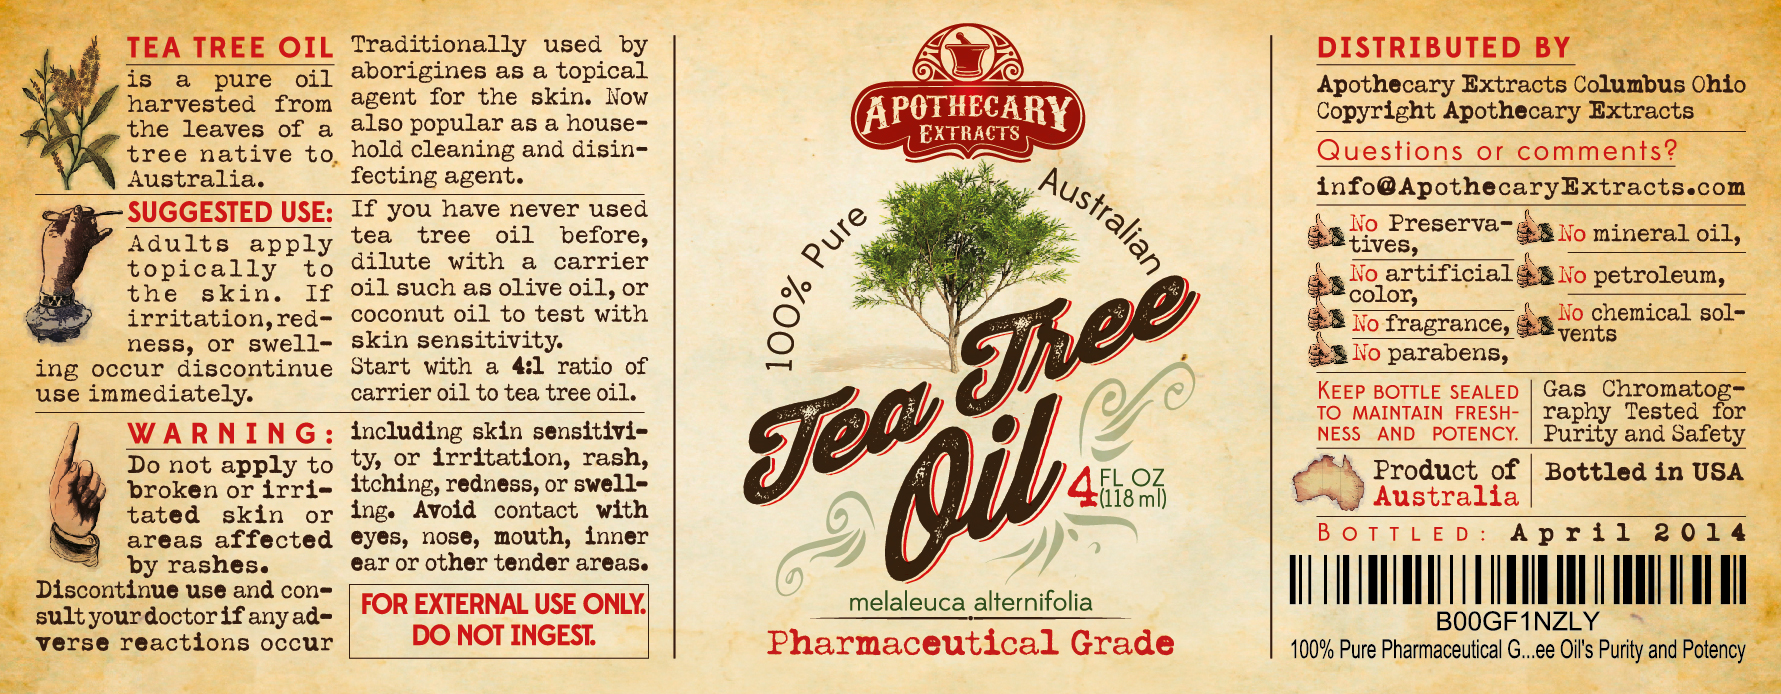 5 Life-Changing Uses for Apothecary Extracts Tea Tree Oil